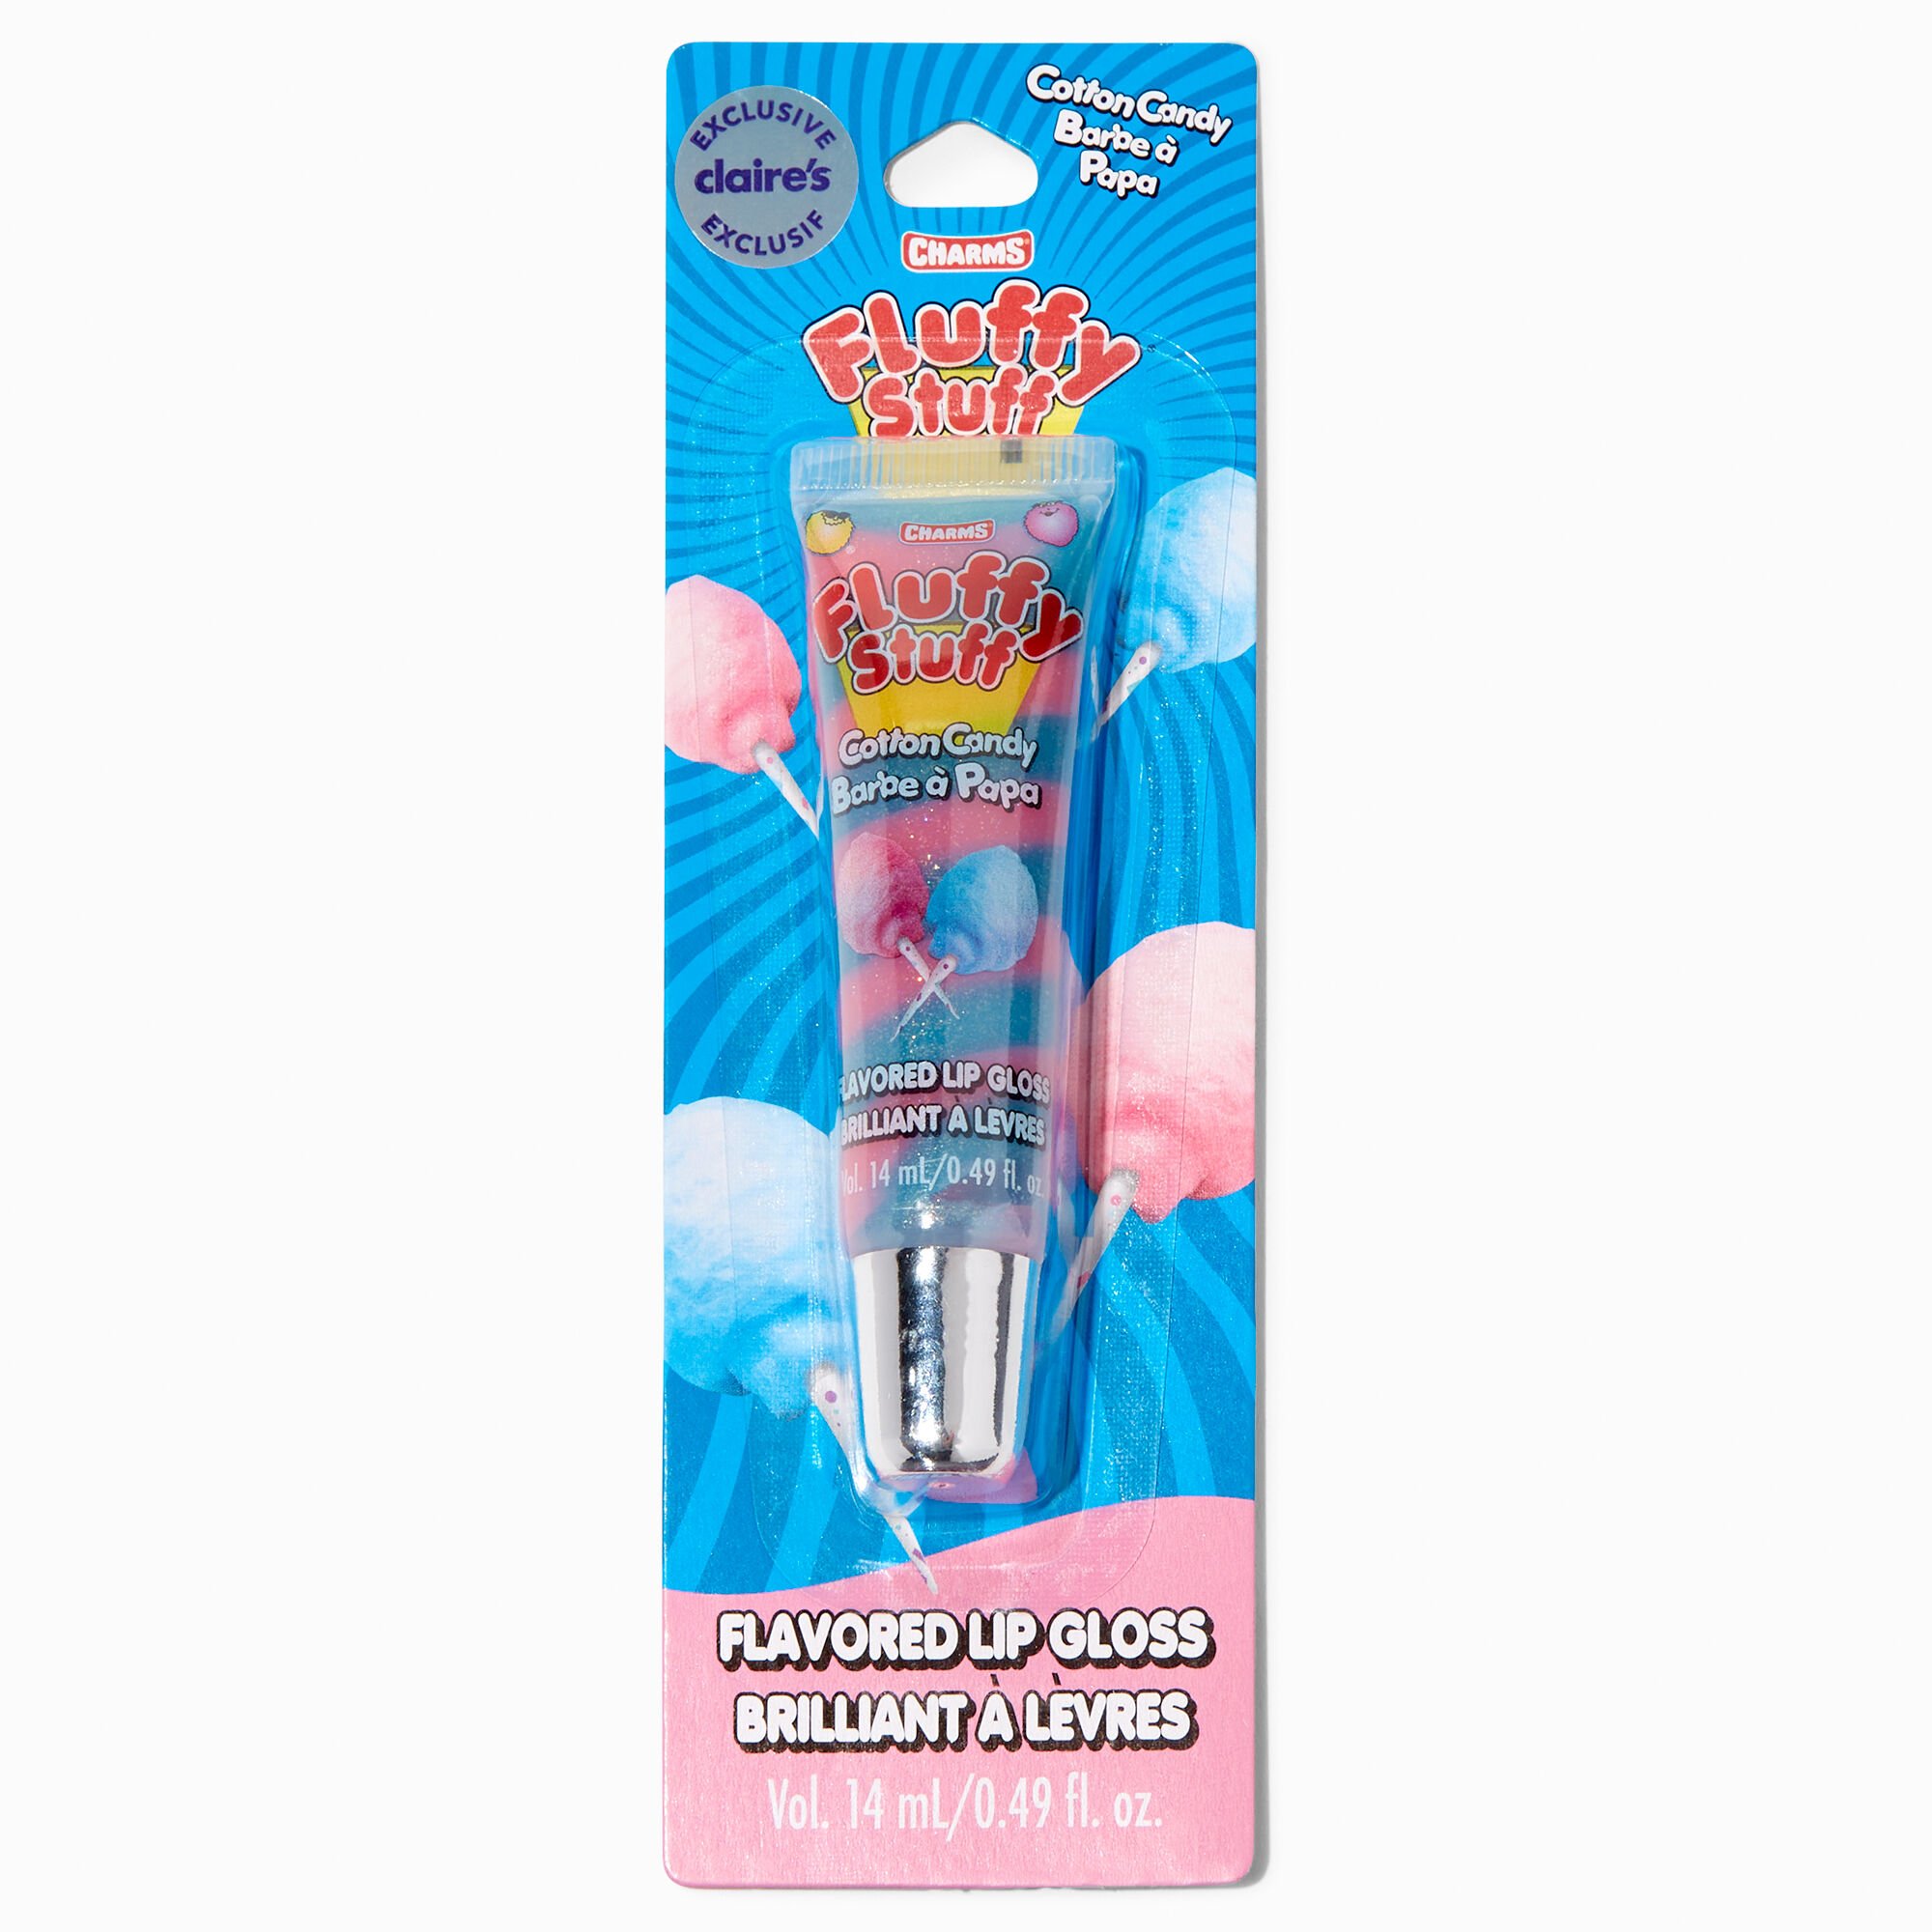 View Charms Fluffy Stuff Claires Exclusive Flavored Lip Gloss Tube Cotton Candy information